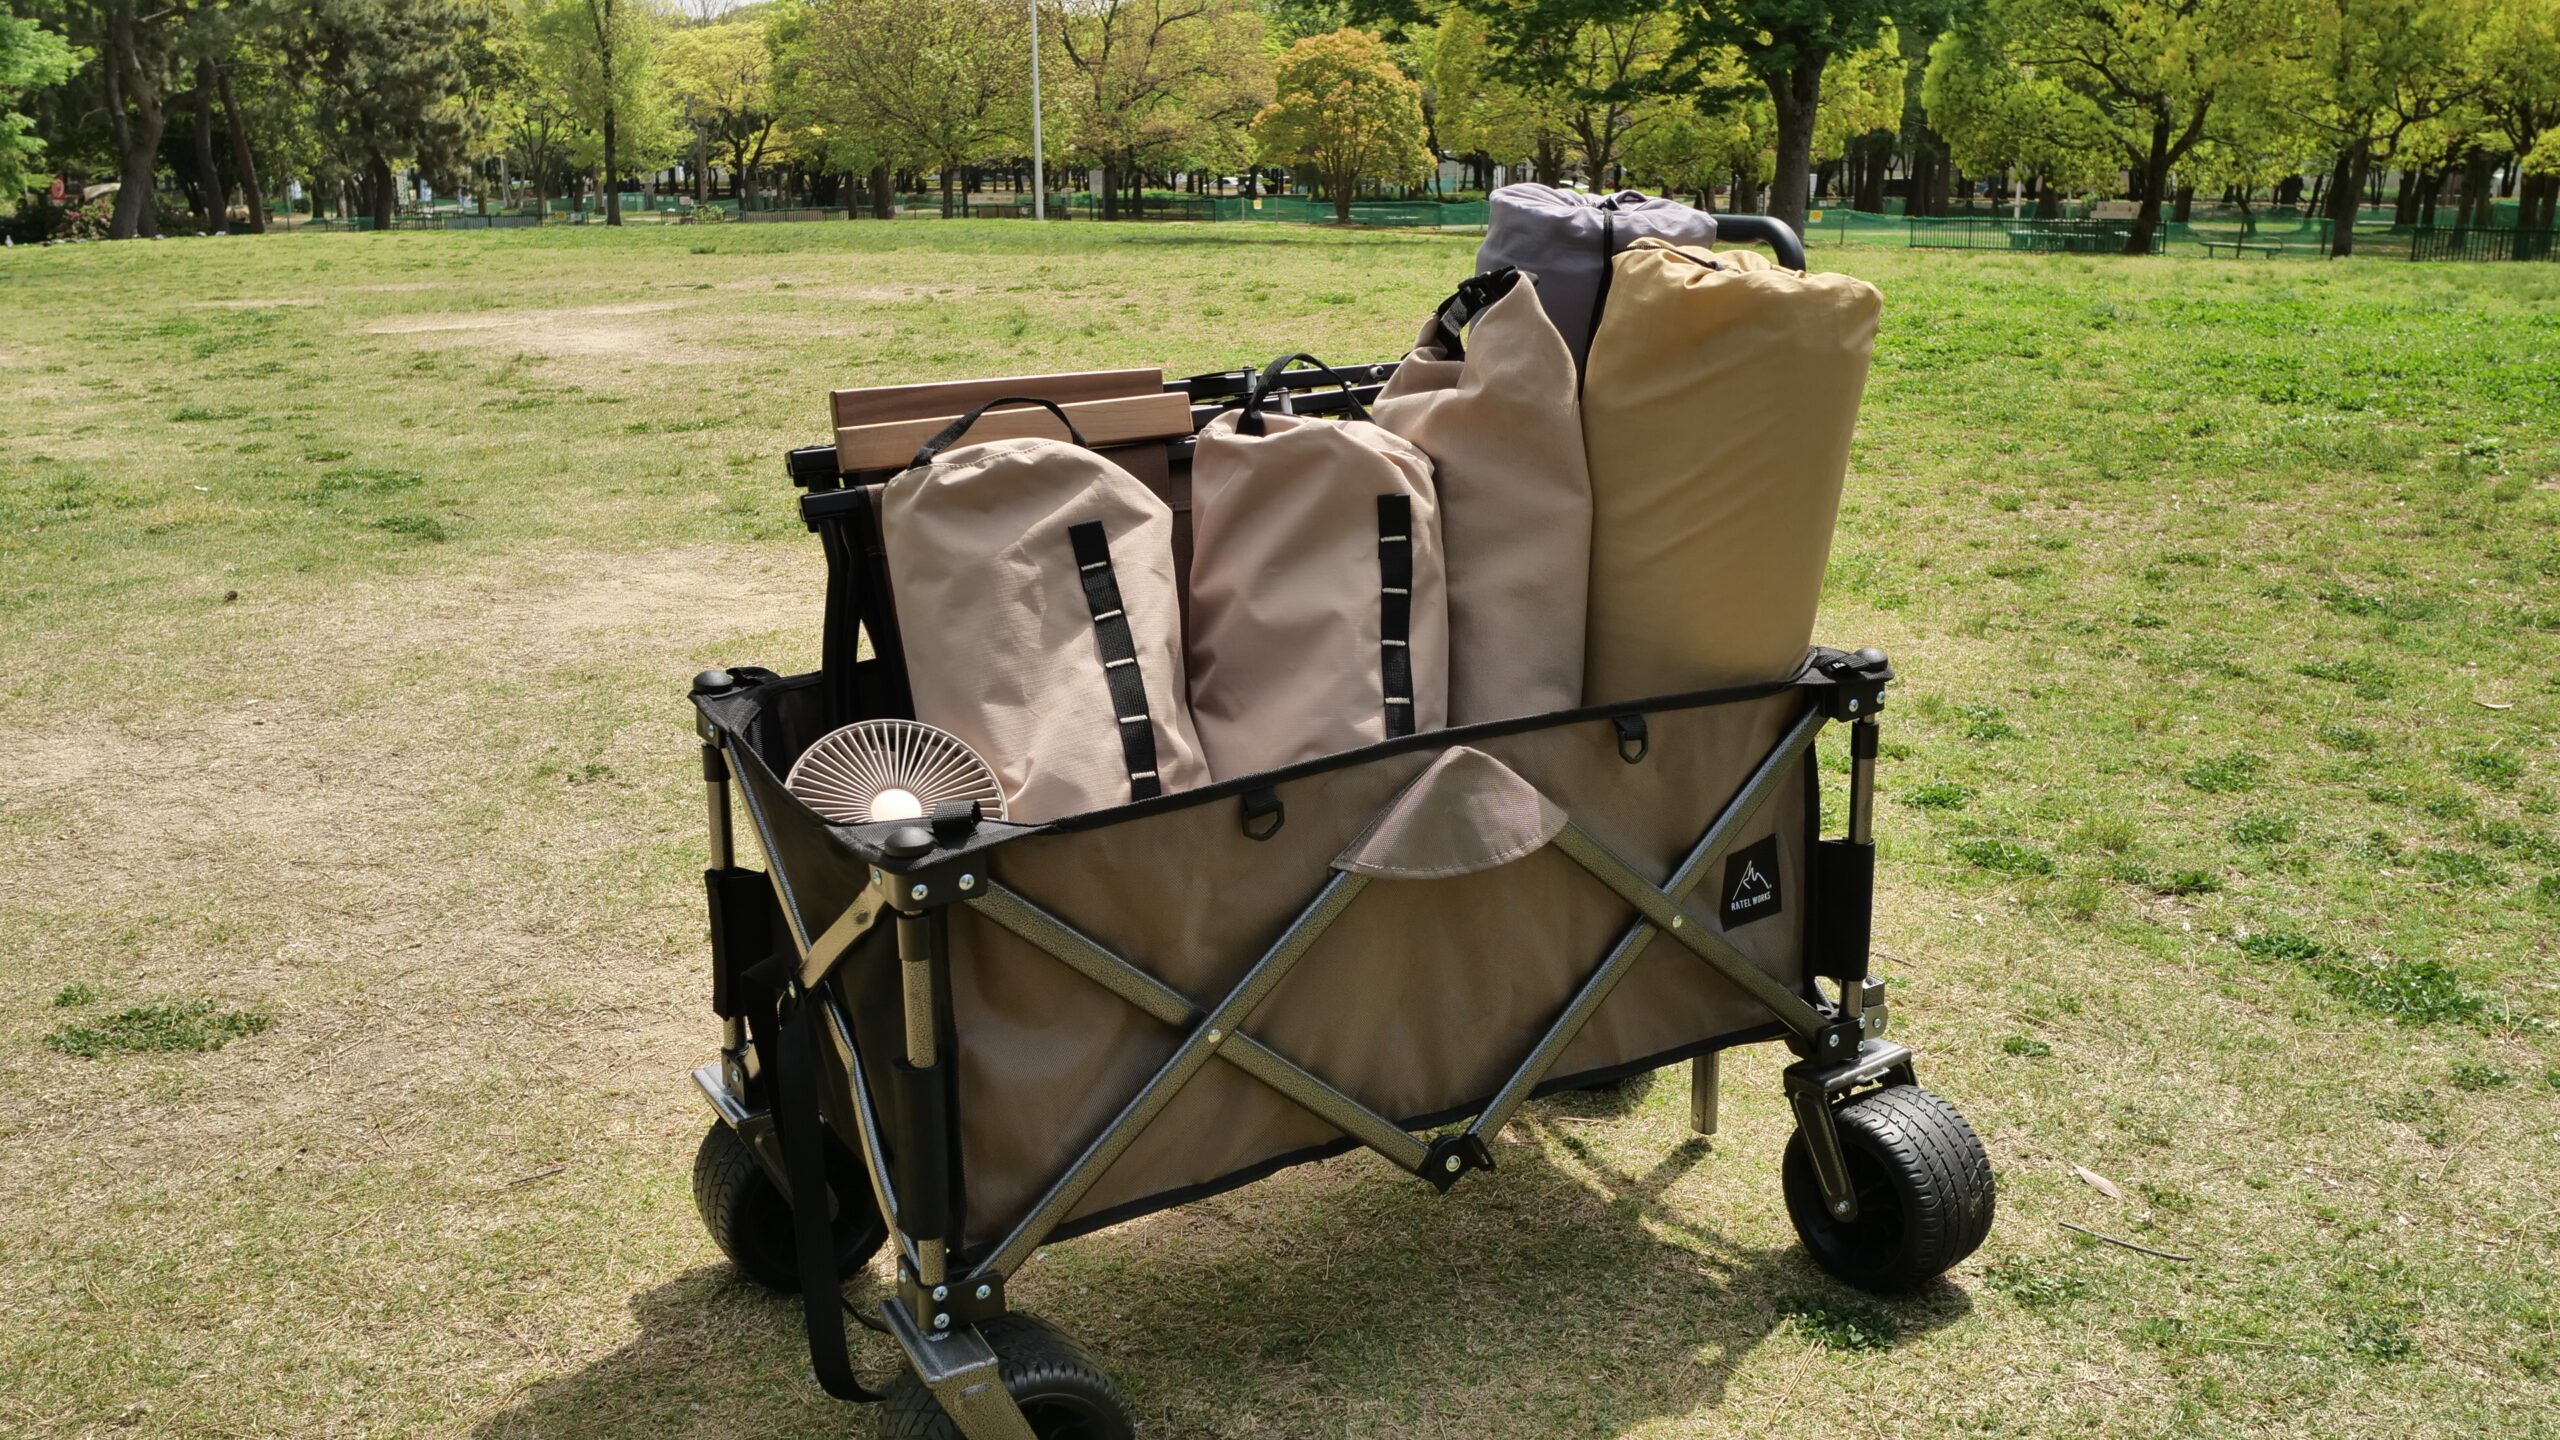 【RATEL WORKS】OUTDOOR WAGON（キャリーワゴン）